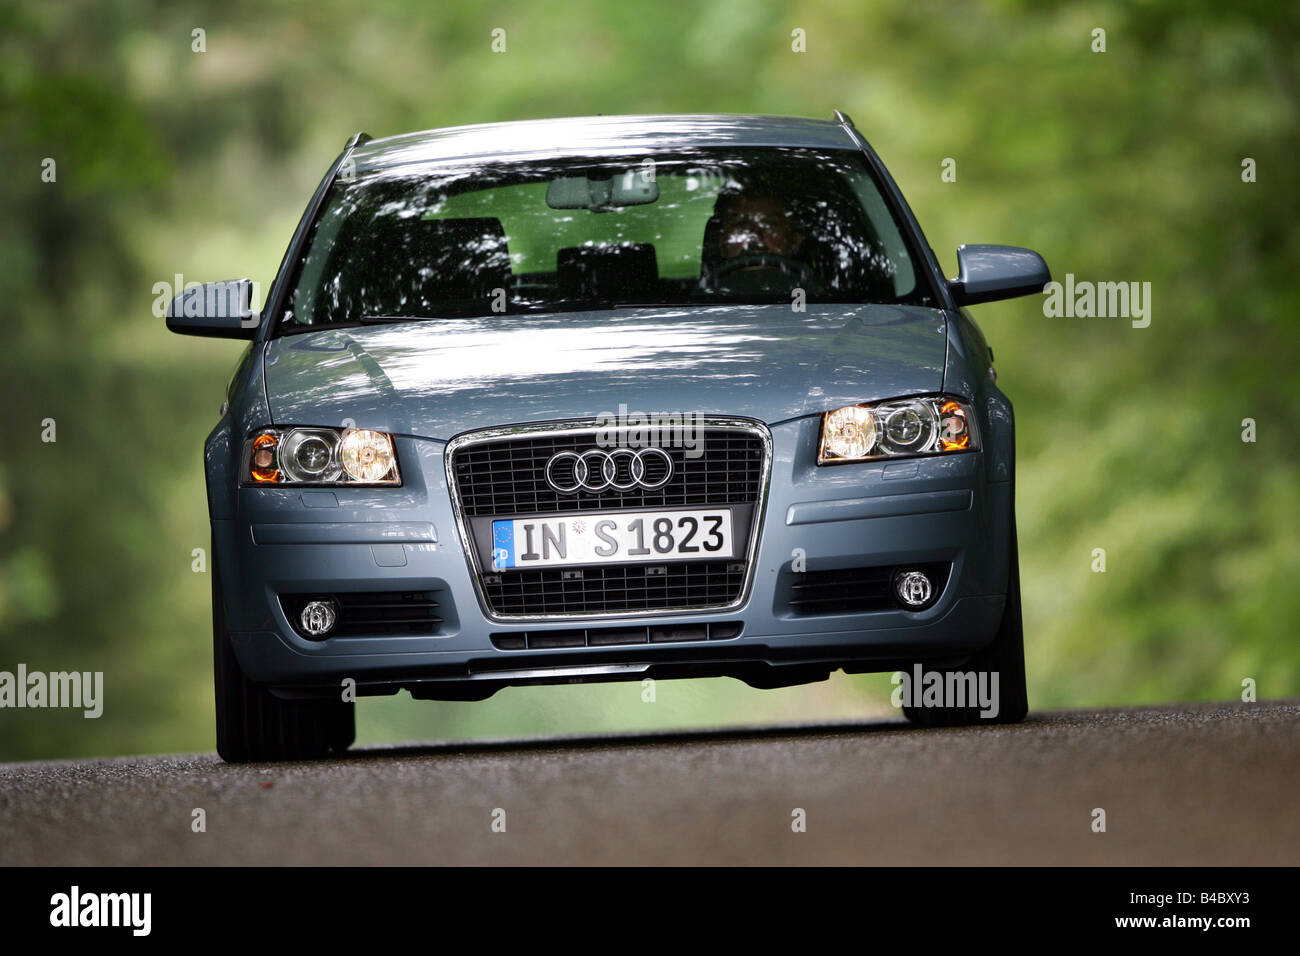 Car, Audi A3 Sportback TFSI, model year 2004-, hatchback, Lower middle-sized class, silver-blue moving, diagonal from the fr Stock Photo Alamy